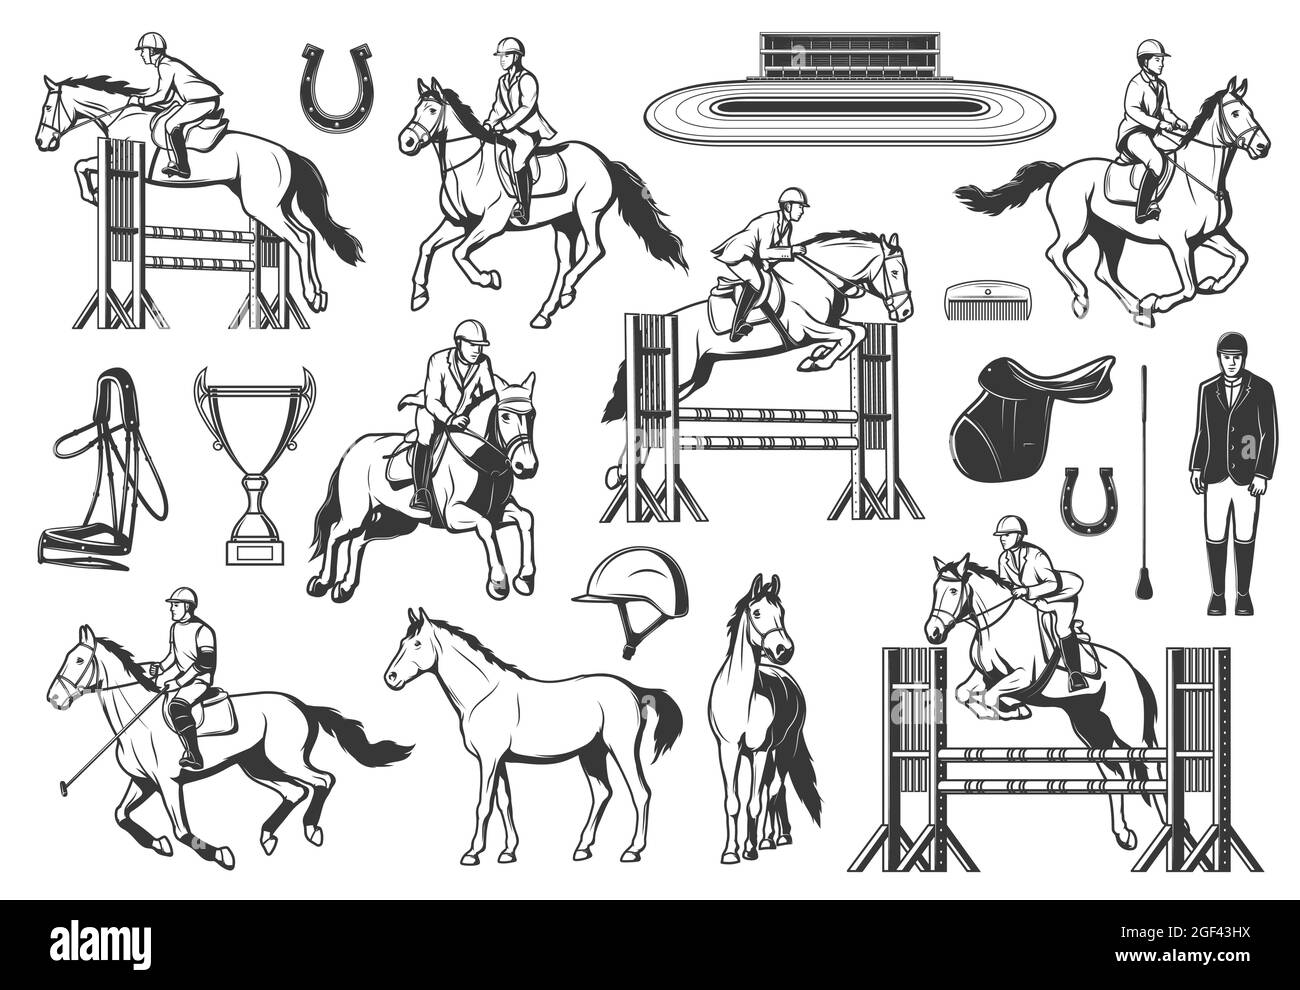 Equestrian sport, horse racing and show jumping. Jockey riding stallion, jumping obstacles and racing on hippodrome, polo player, saddle and whip, har Stock Vector